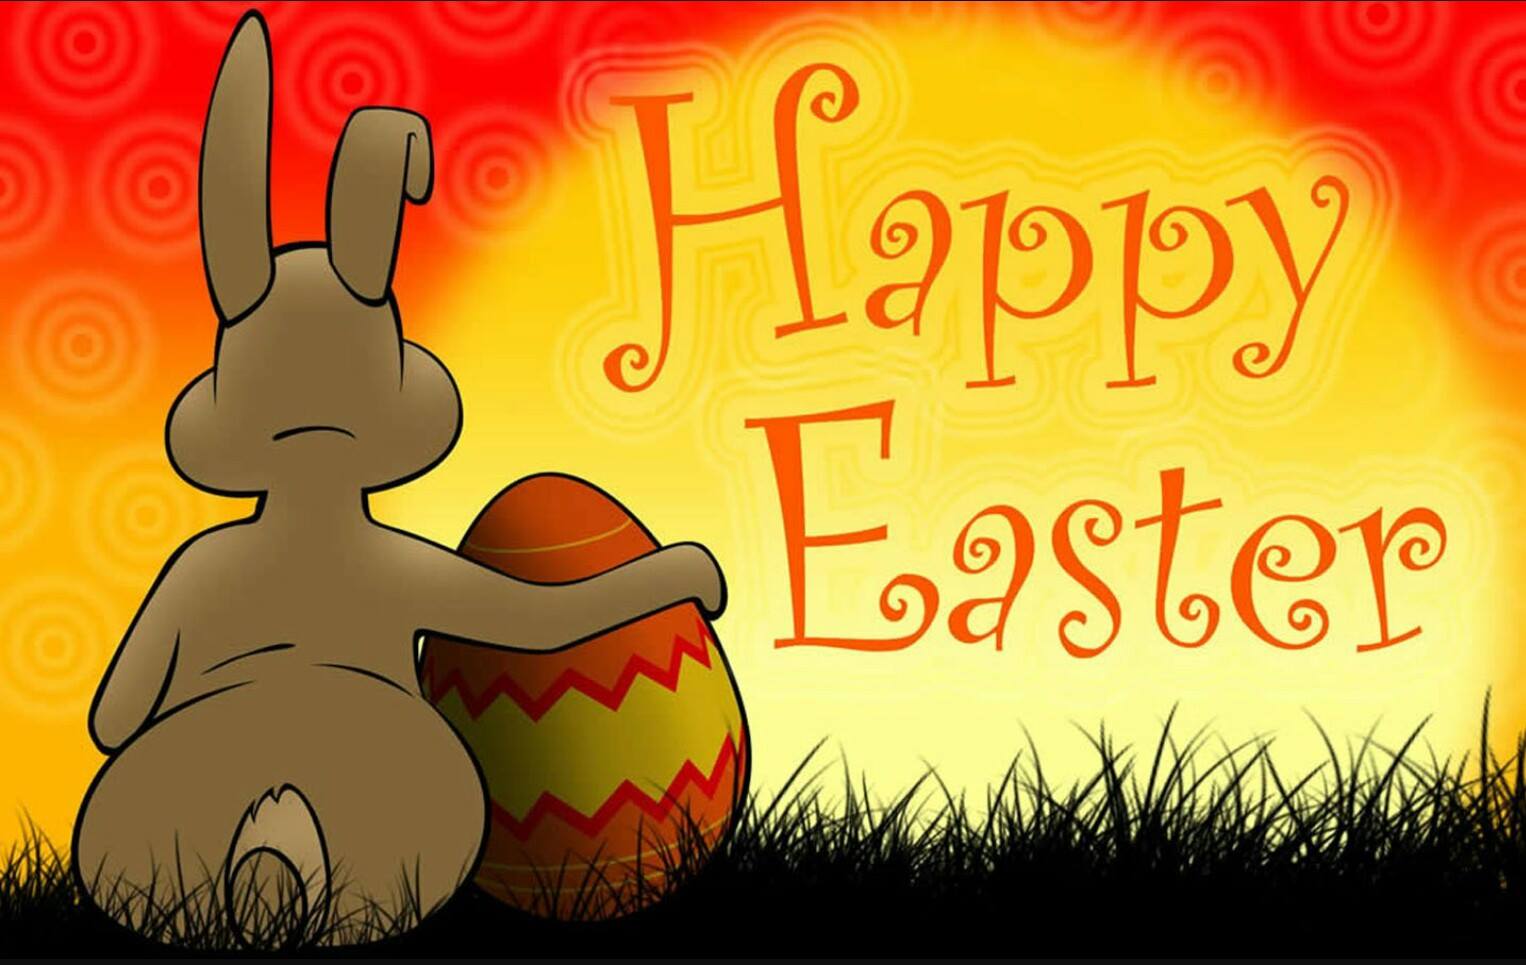 Happy Easter 2015